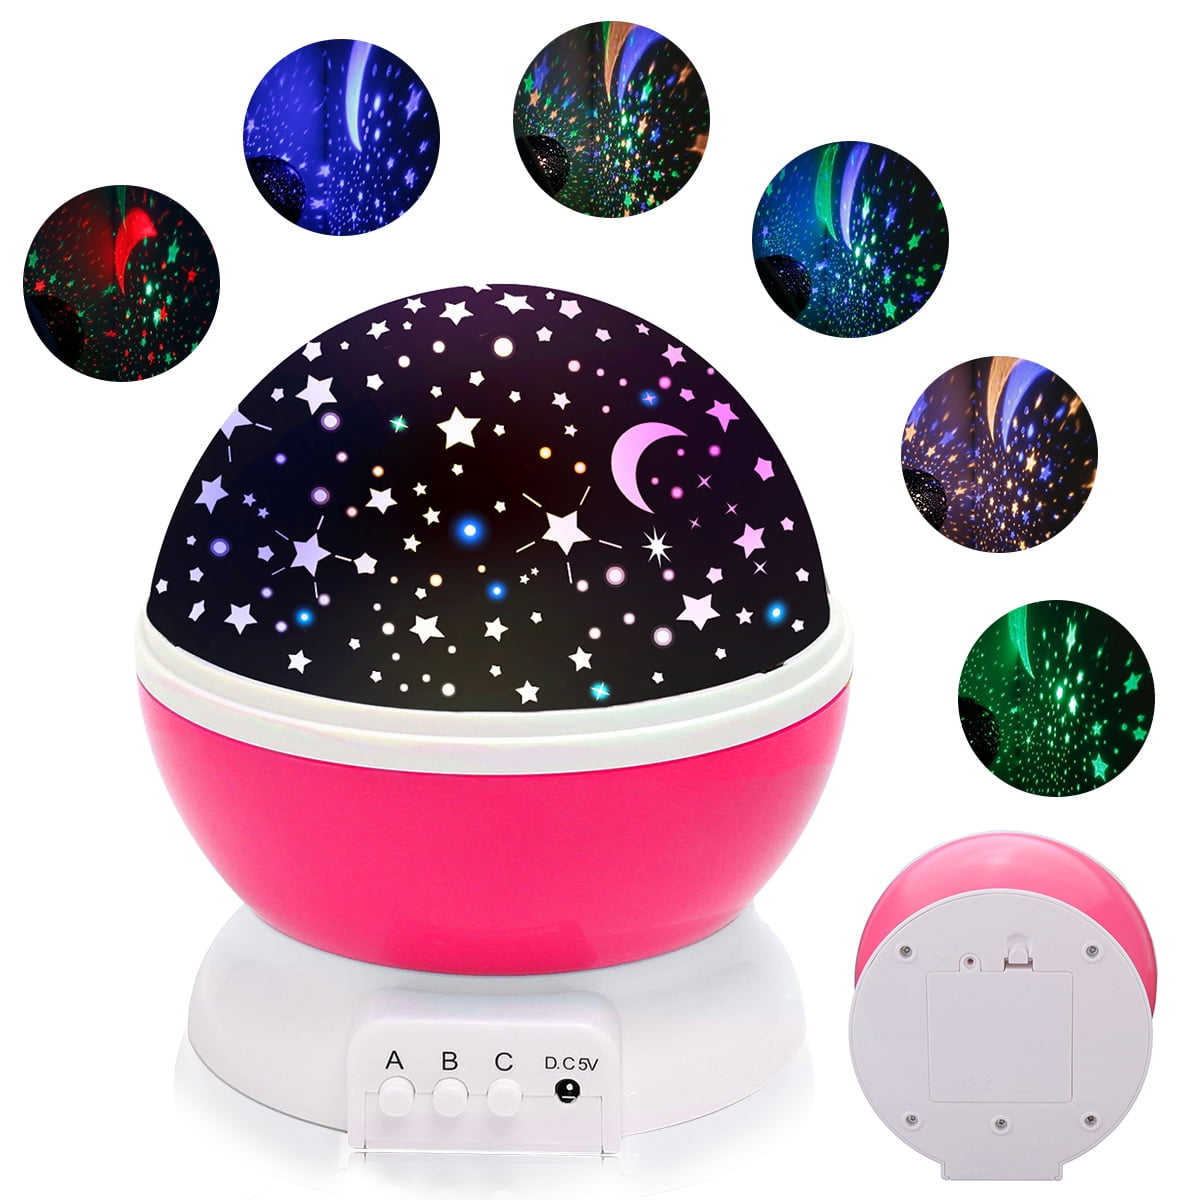 Details about   LED Starry Night Sky Projector Lamp Star Light Master Party Decor Geat Gifts USA 